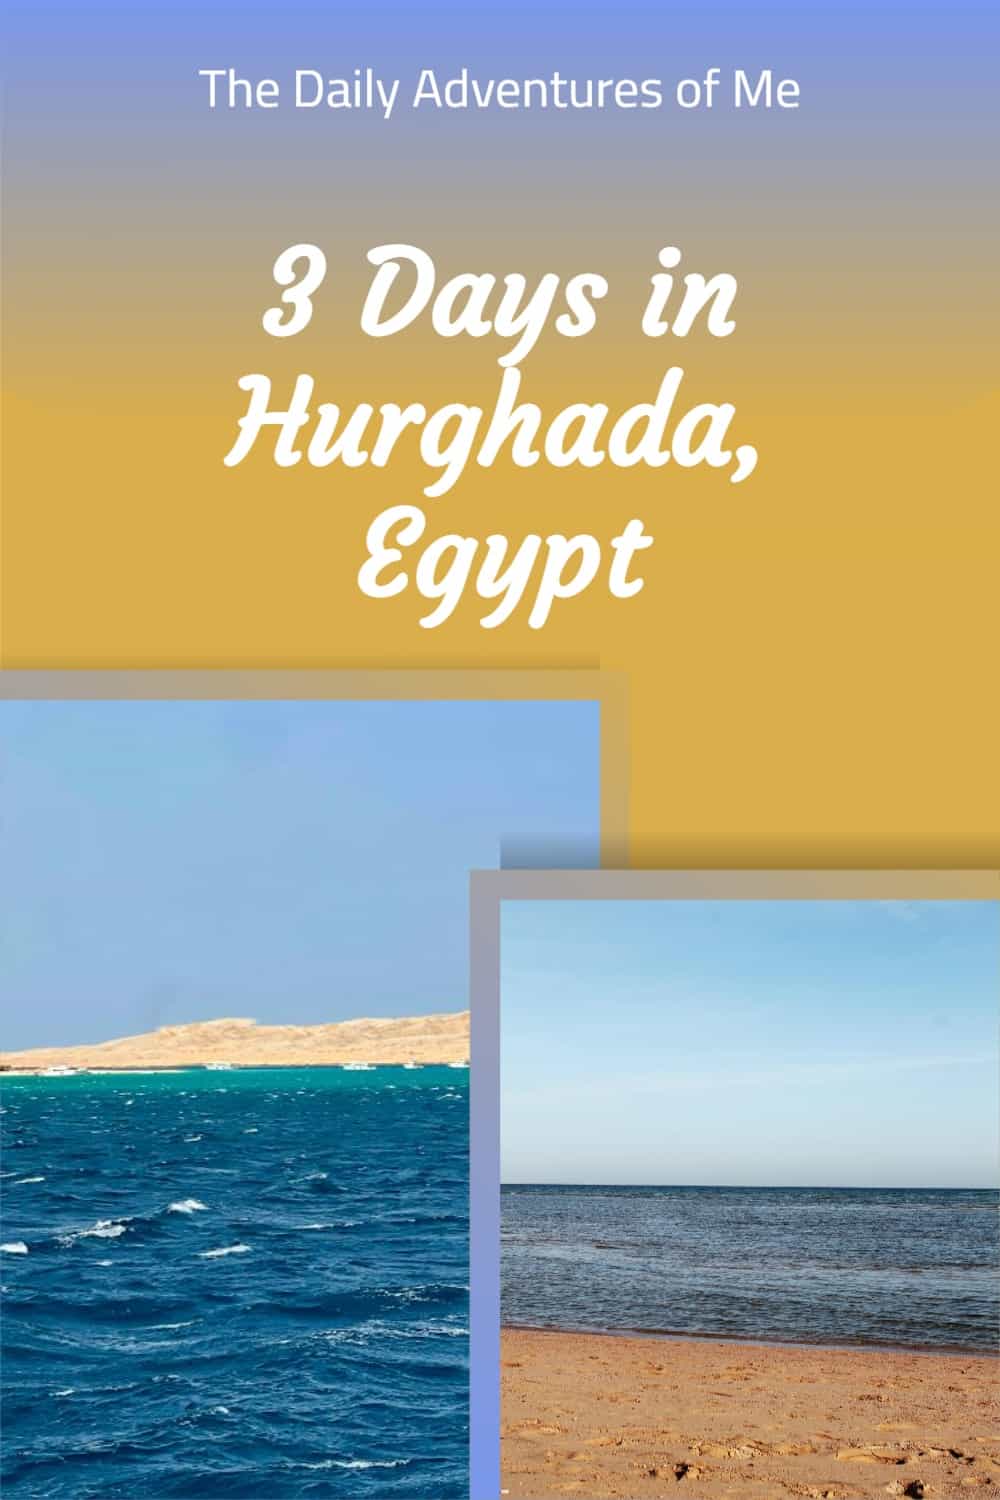 While visiting Egypt, be sure to spend a few days on the coast of the Red Sea. Here you can not only dive and enjoy the beach, but also experience souks, the desert and Bedouin culture. #thingstodoinHurghada #Egypttravel #SCUBA #redseascuba